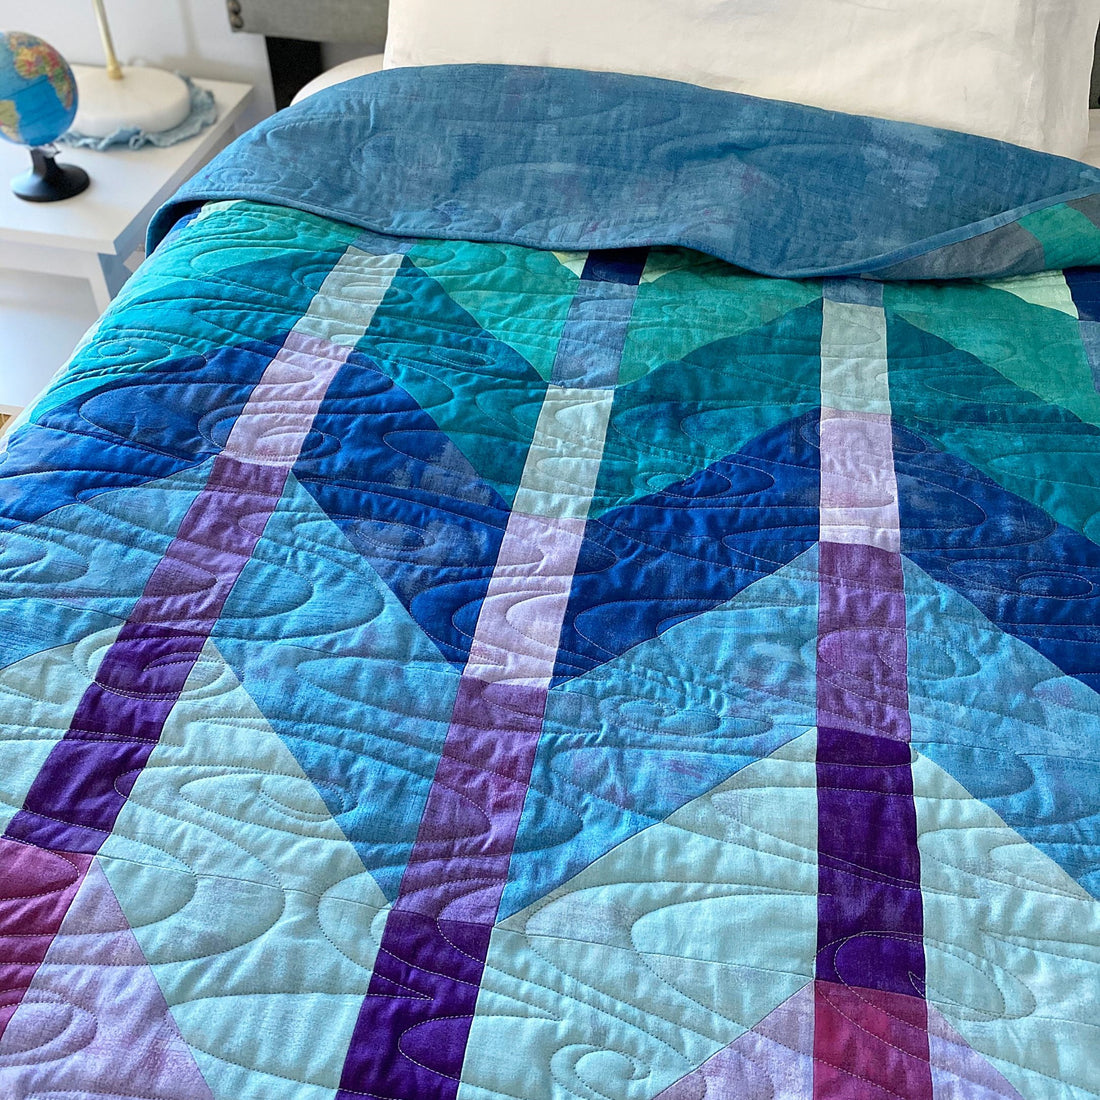 Ombre Mountains Quilt - The Moda Grunge One!